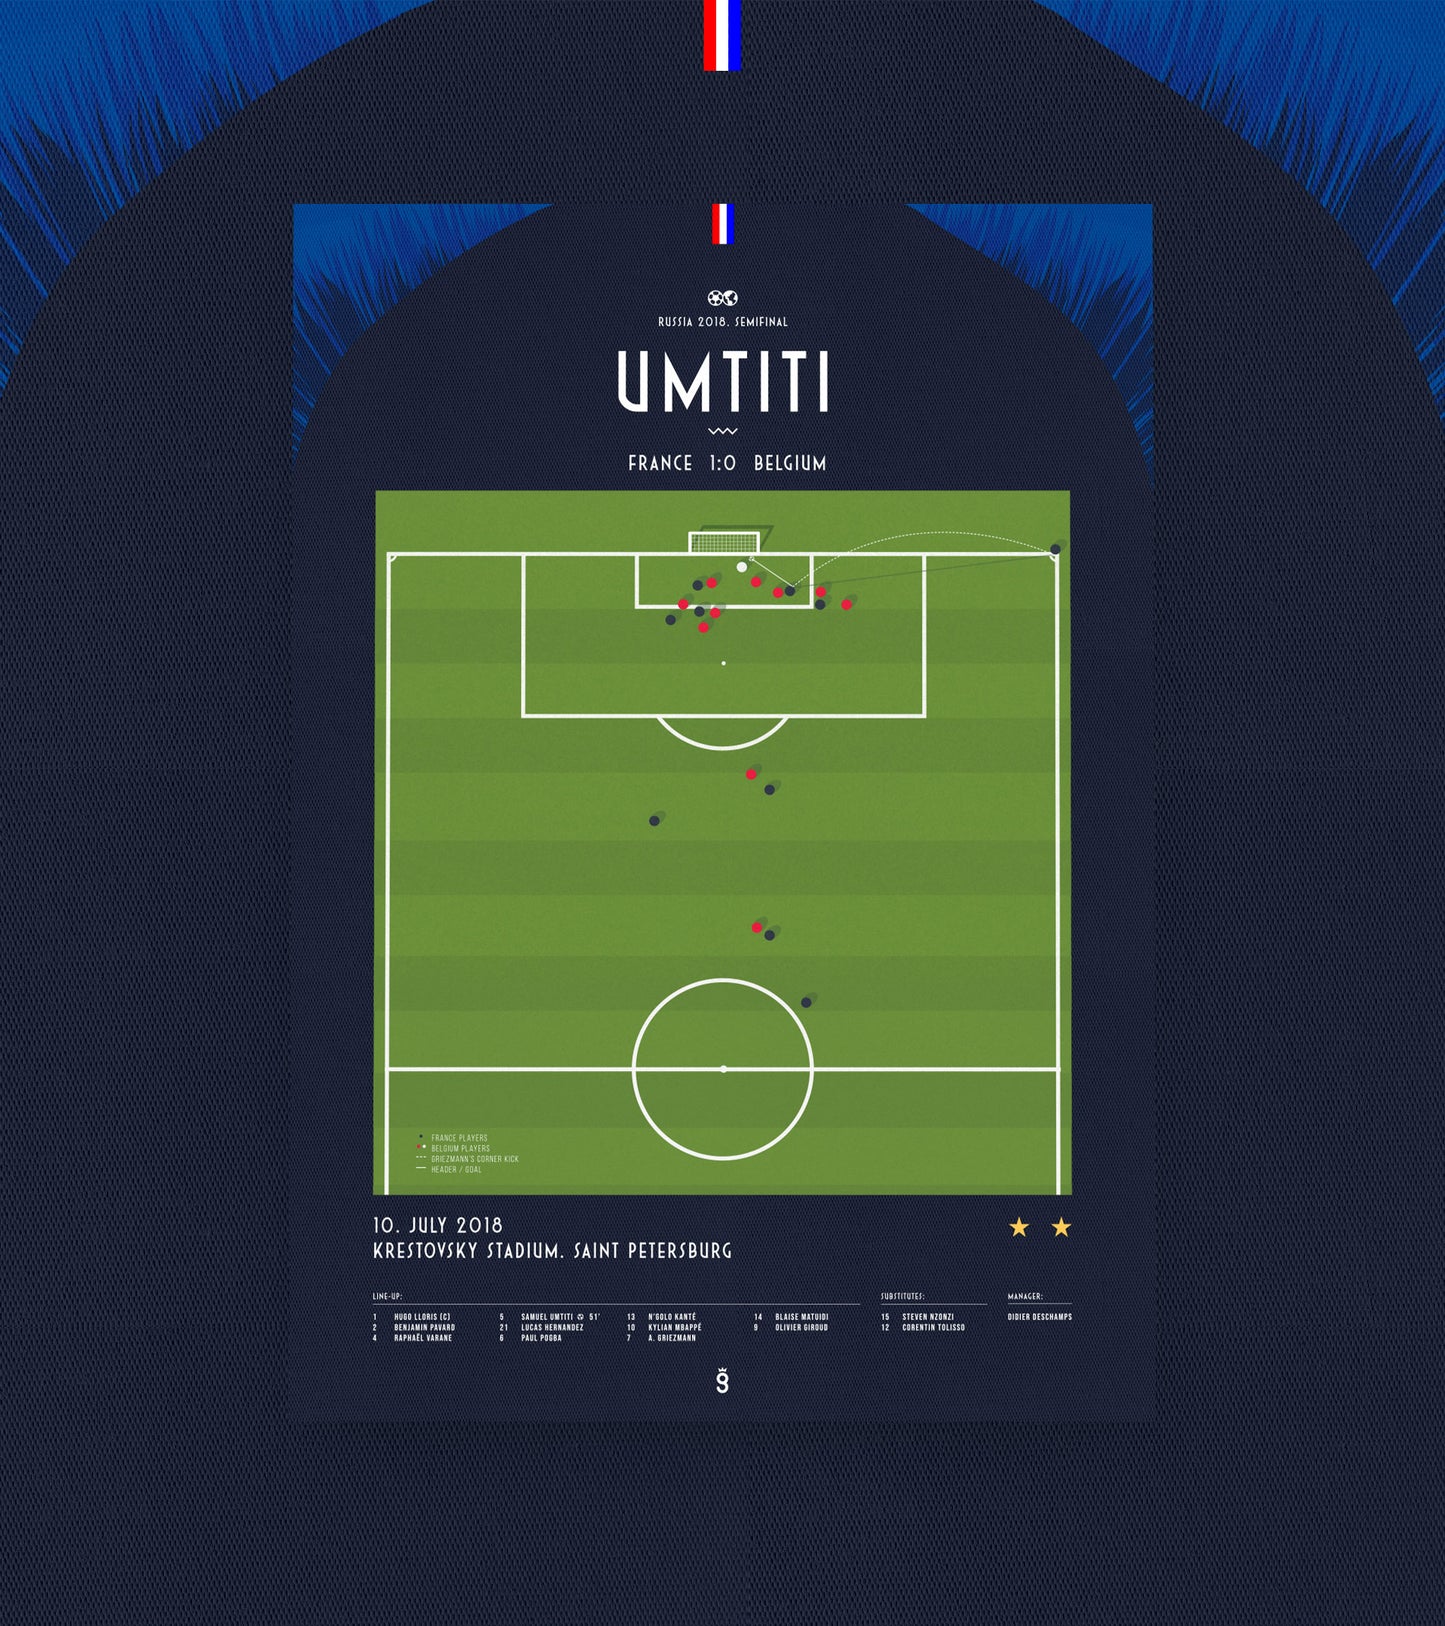 Umtiti scores only goal & France reaches the final